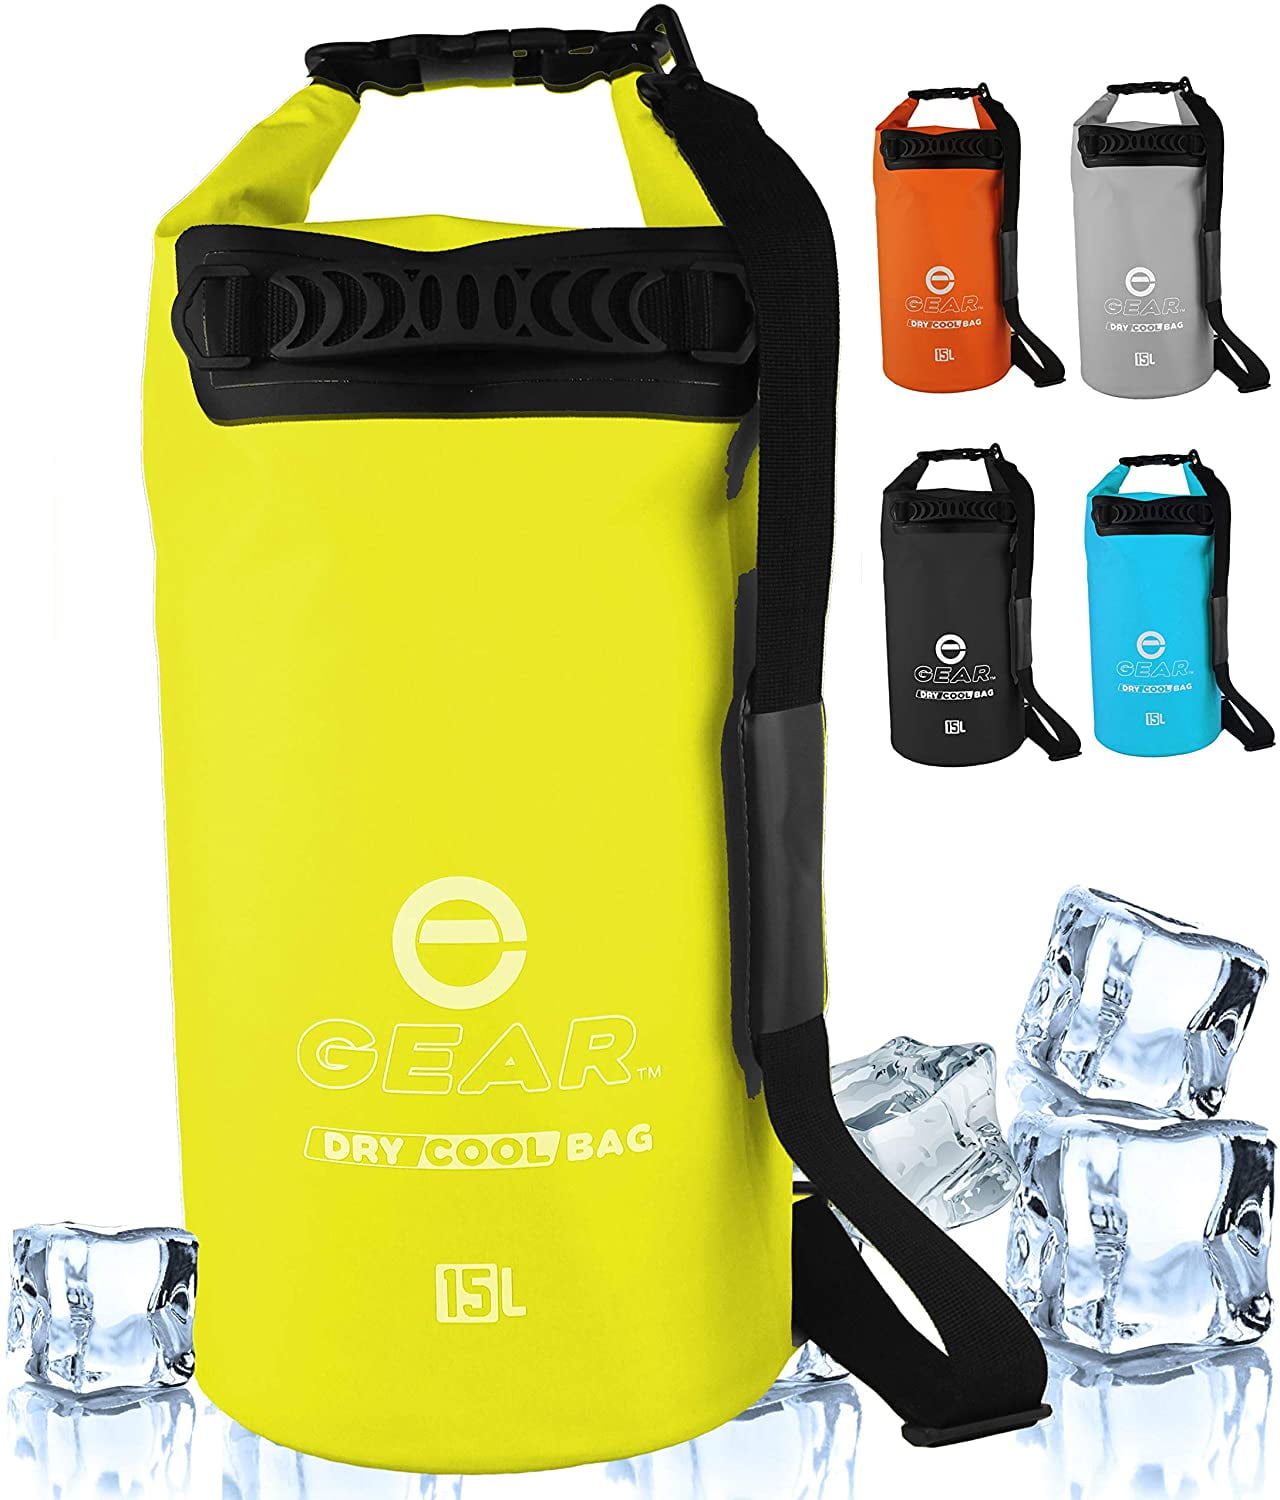 Enthusiast Gear Dry Bag Cooler - Roll Top, Insulated, Leak Proof 